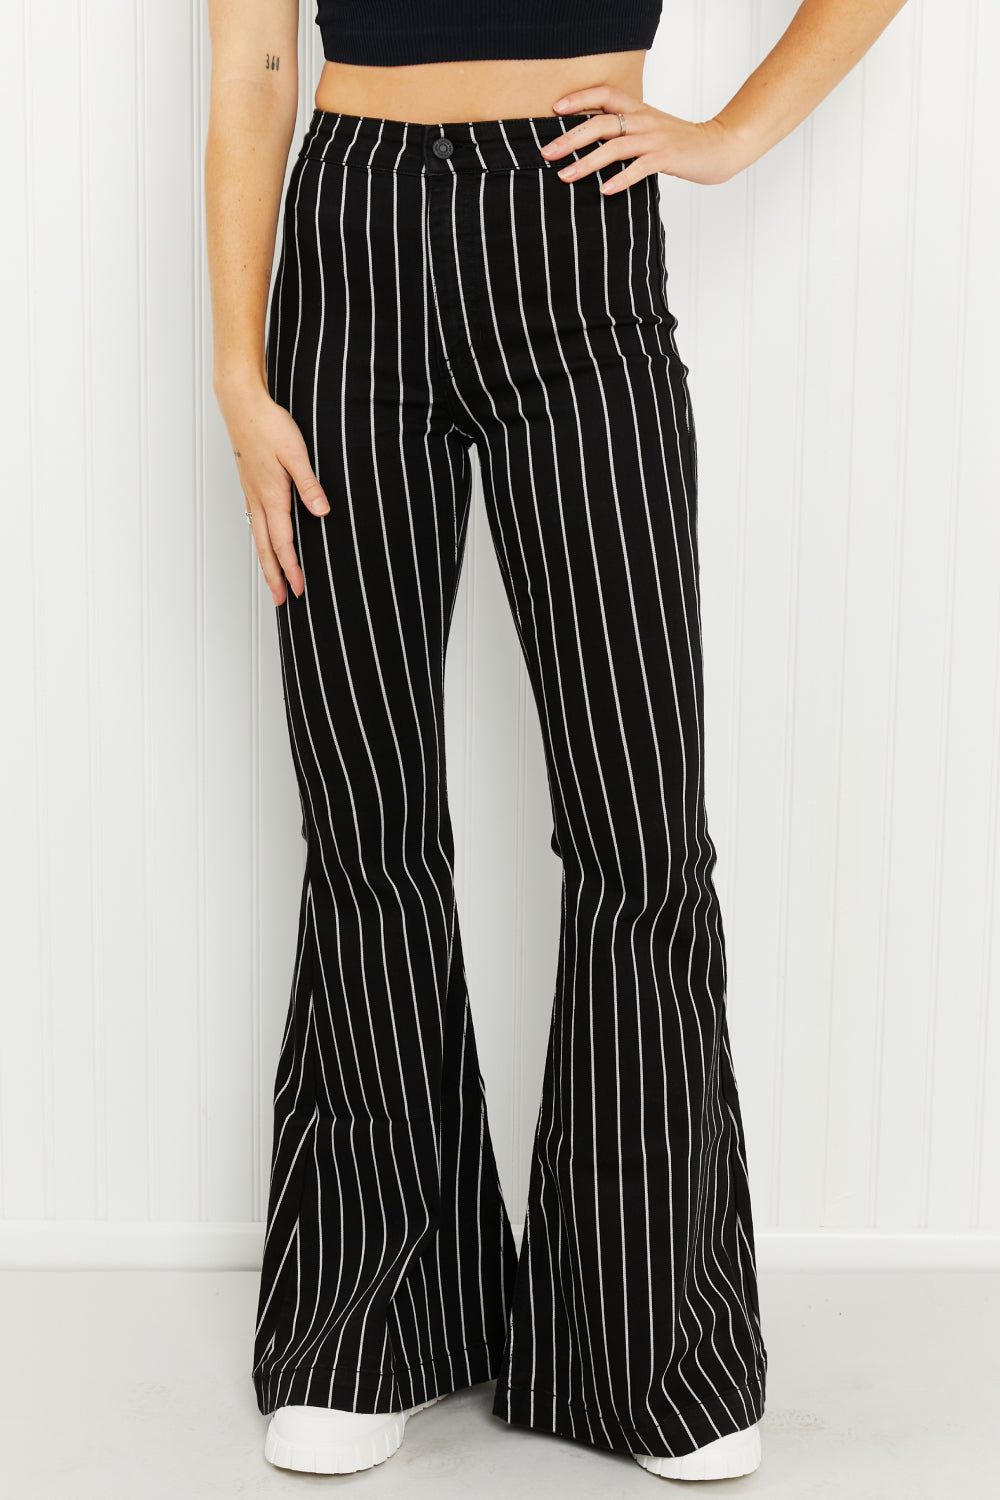 Kancan Blakely Pinstripe High-Rise Super-Flare Jeans